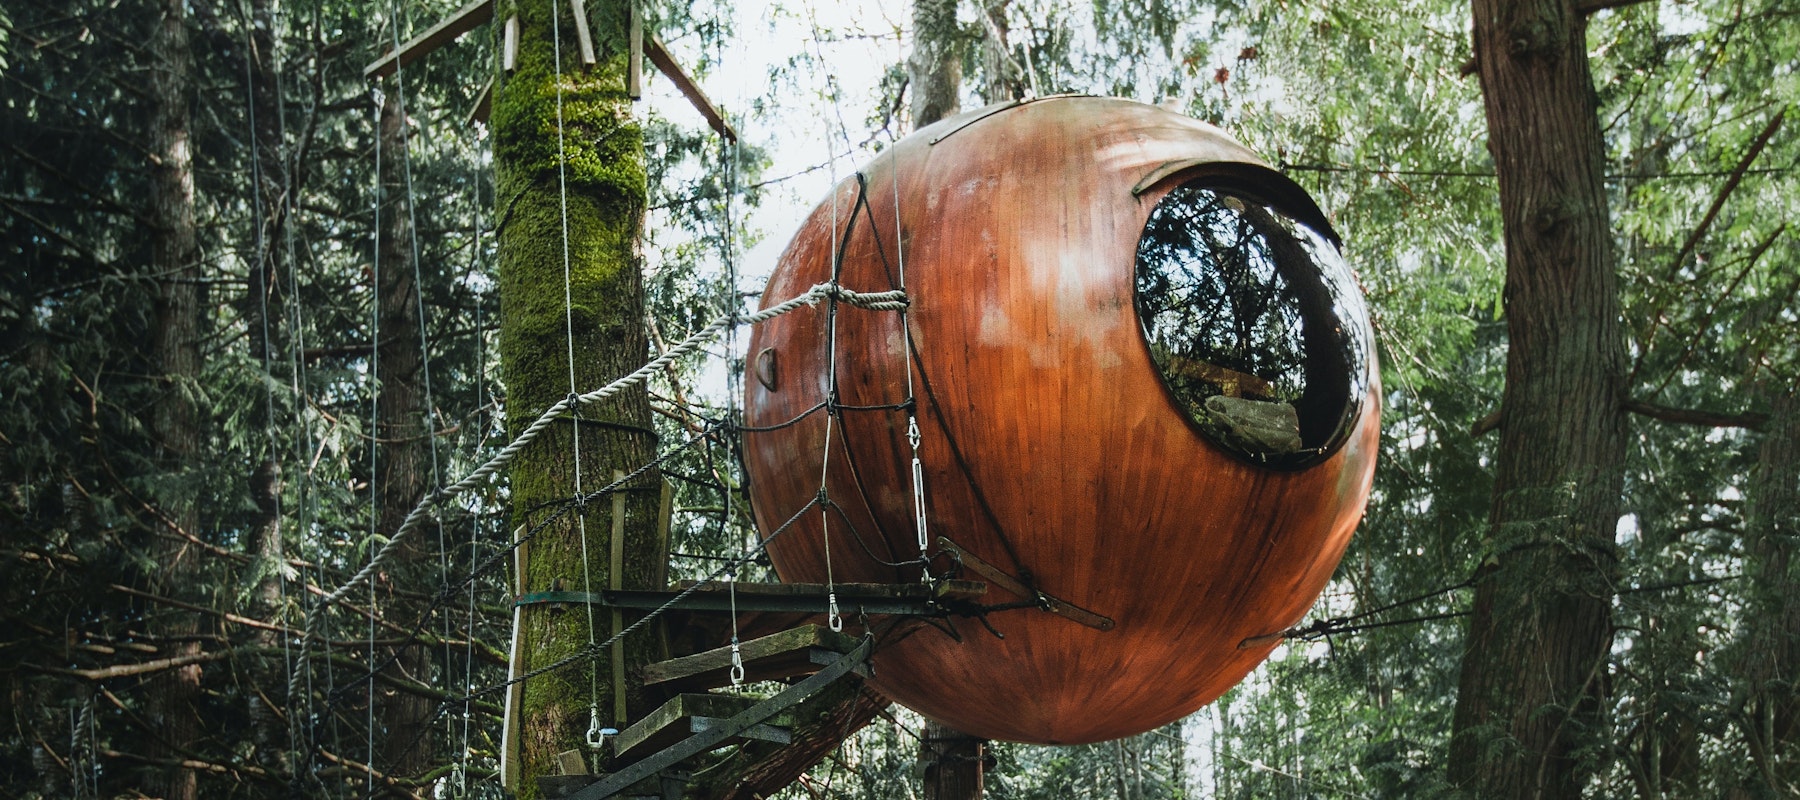 The Best Unusual Airbnbs